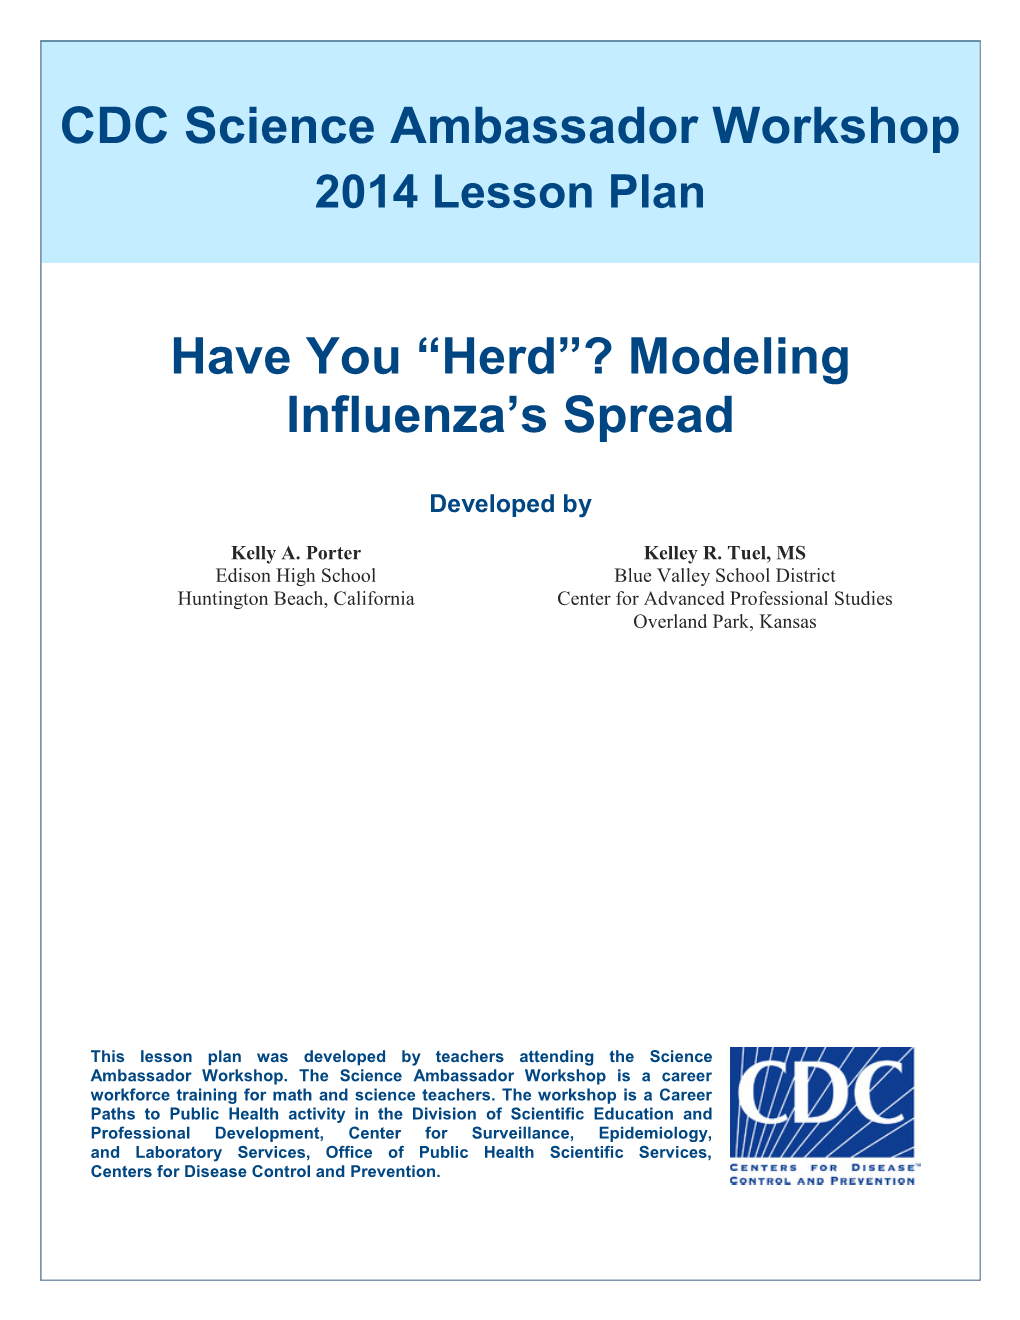 Have You “Herd”? Modeling Influenza's Spread